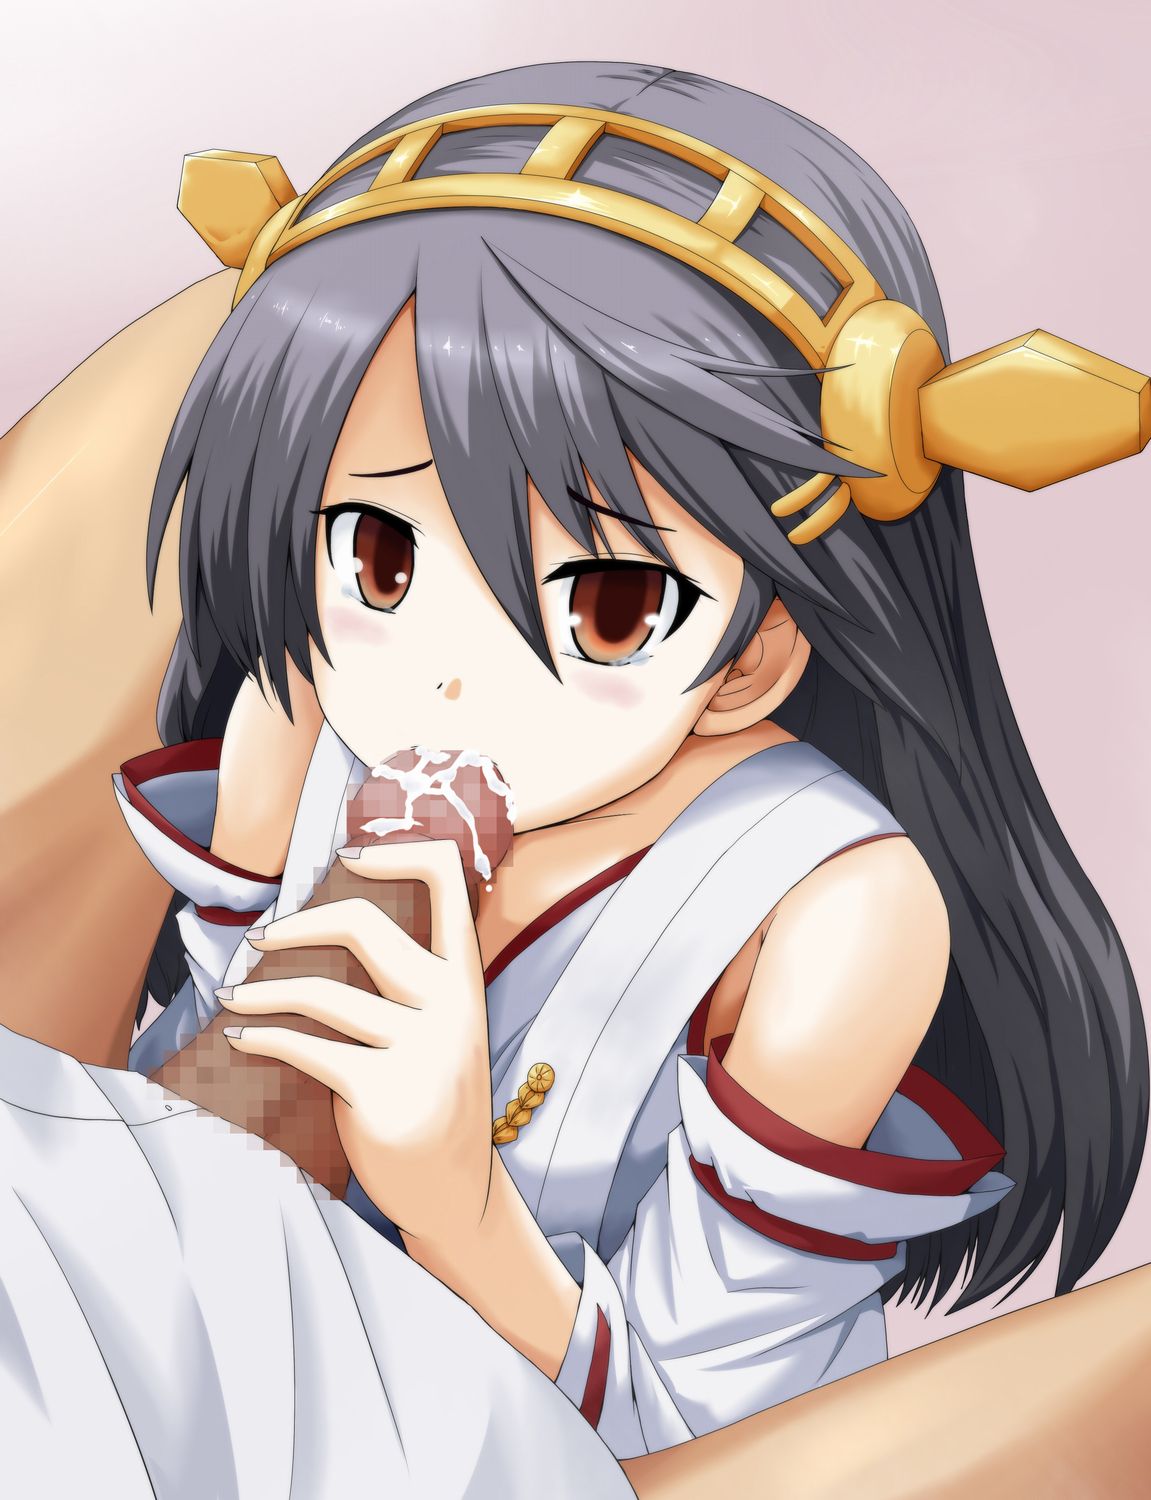 A cute girl serves with her mouth! Two-dimensional erotic image that is too healthy to 25